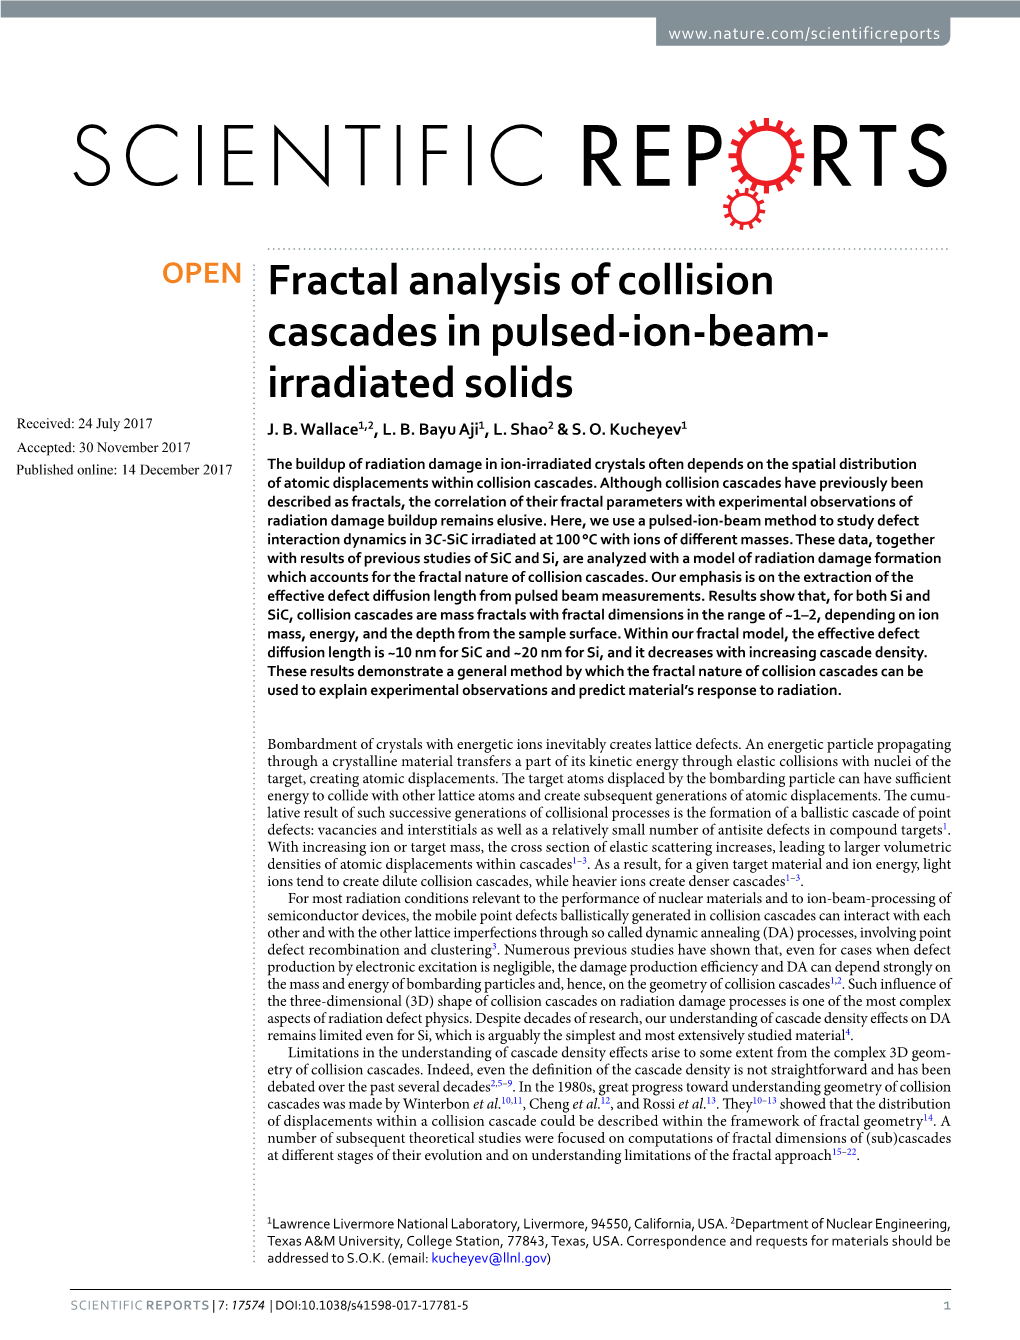 Fractal Analysis of Collision Cascades in Pulsed-Ion-Beam-Irradiated Solids